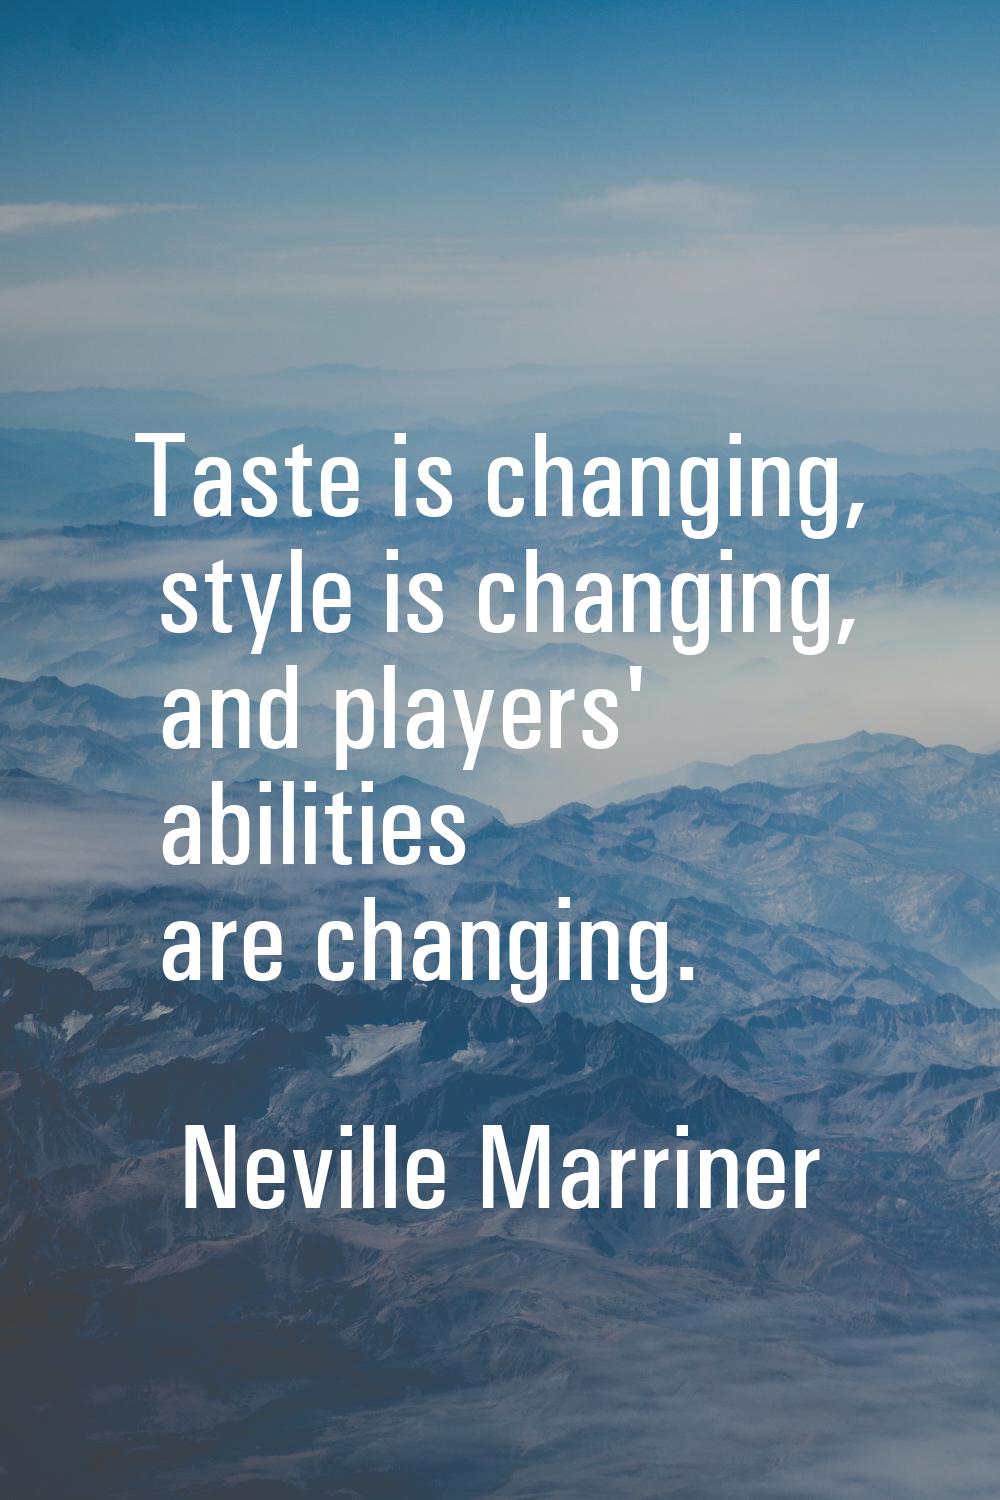 Taste is changing, style is changing, and players' abilities are changing.